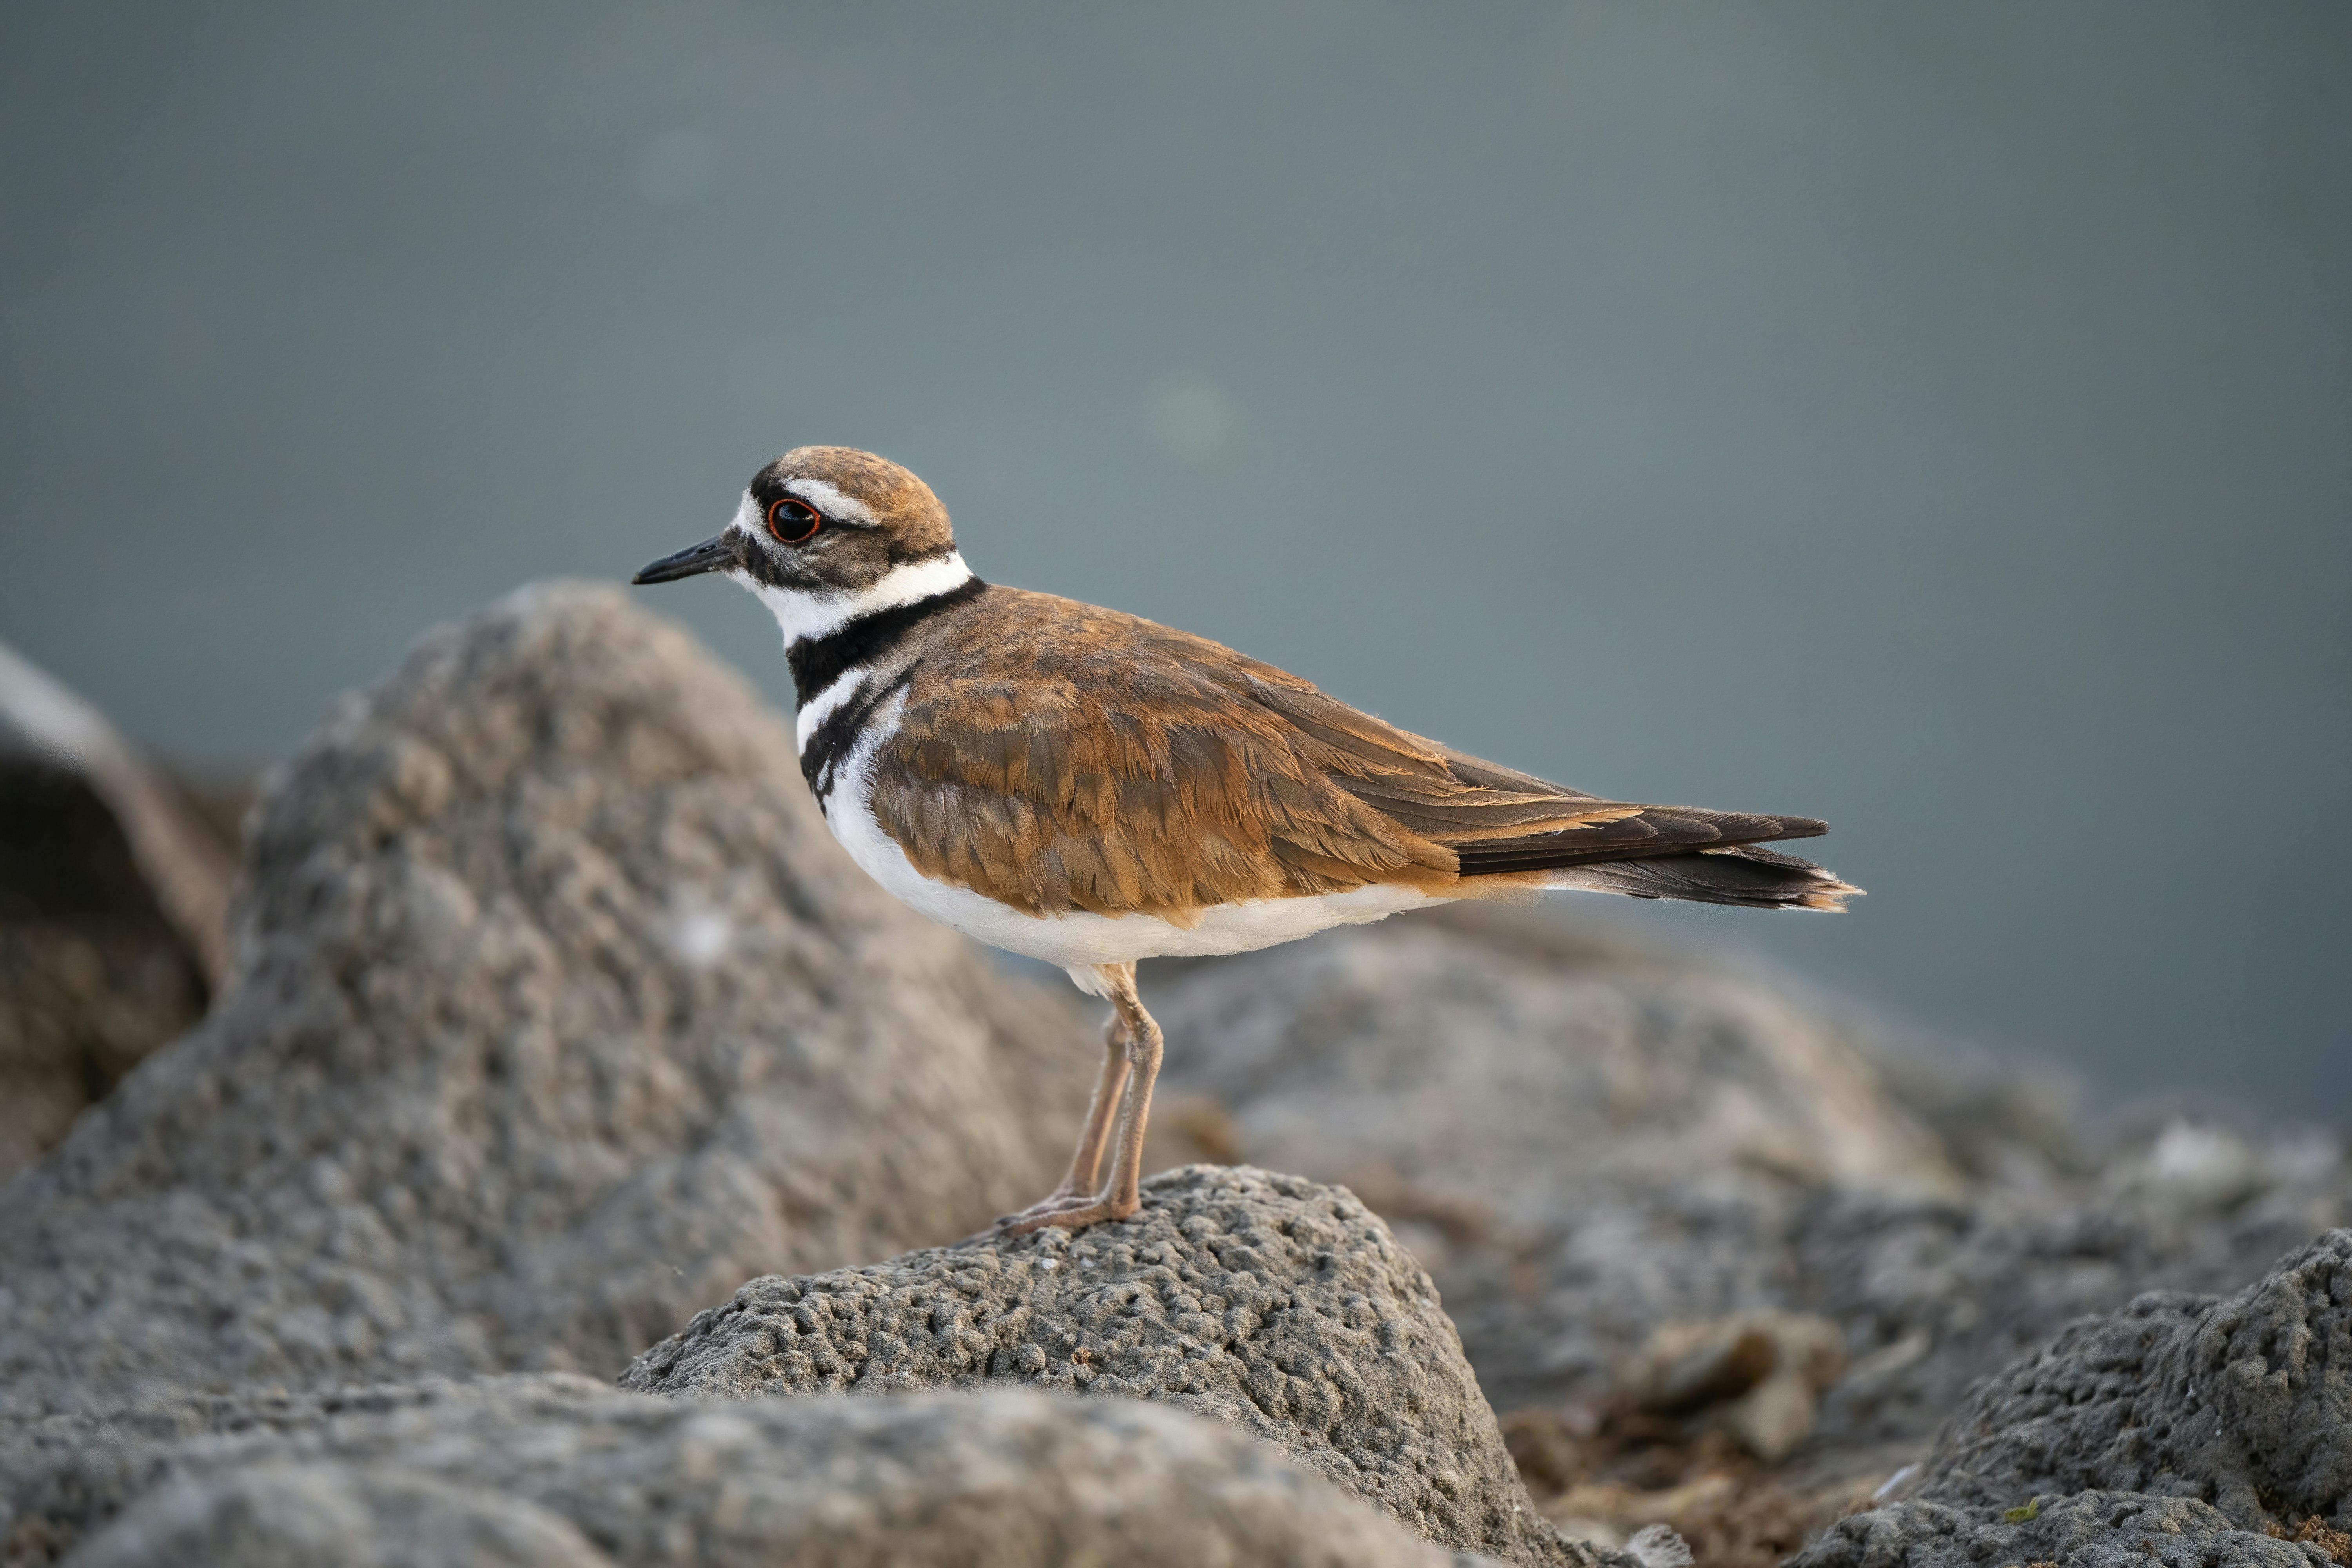 brown and white bird on gray rock